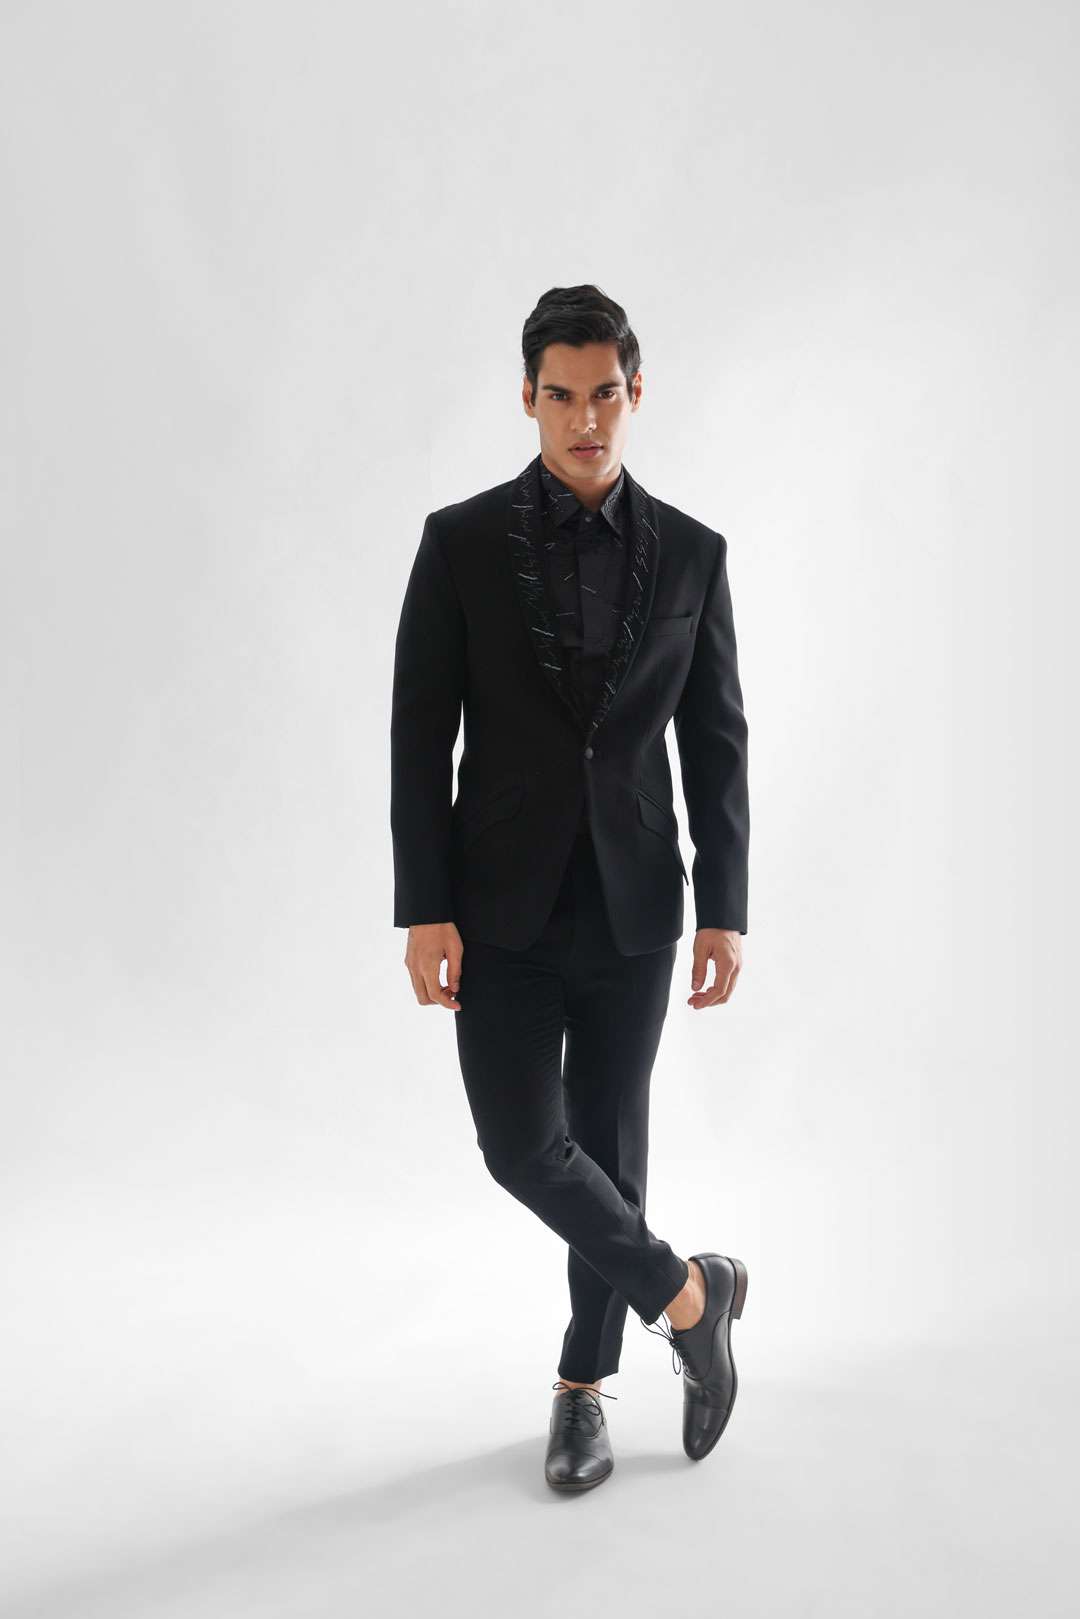 Jet Black Tuxedo Set With Contemporary Embroidery